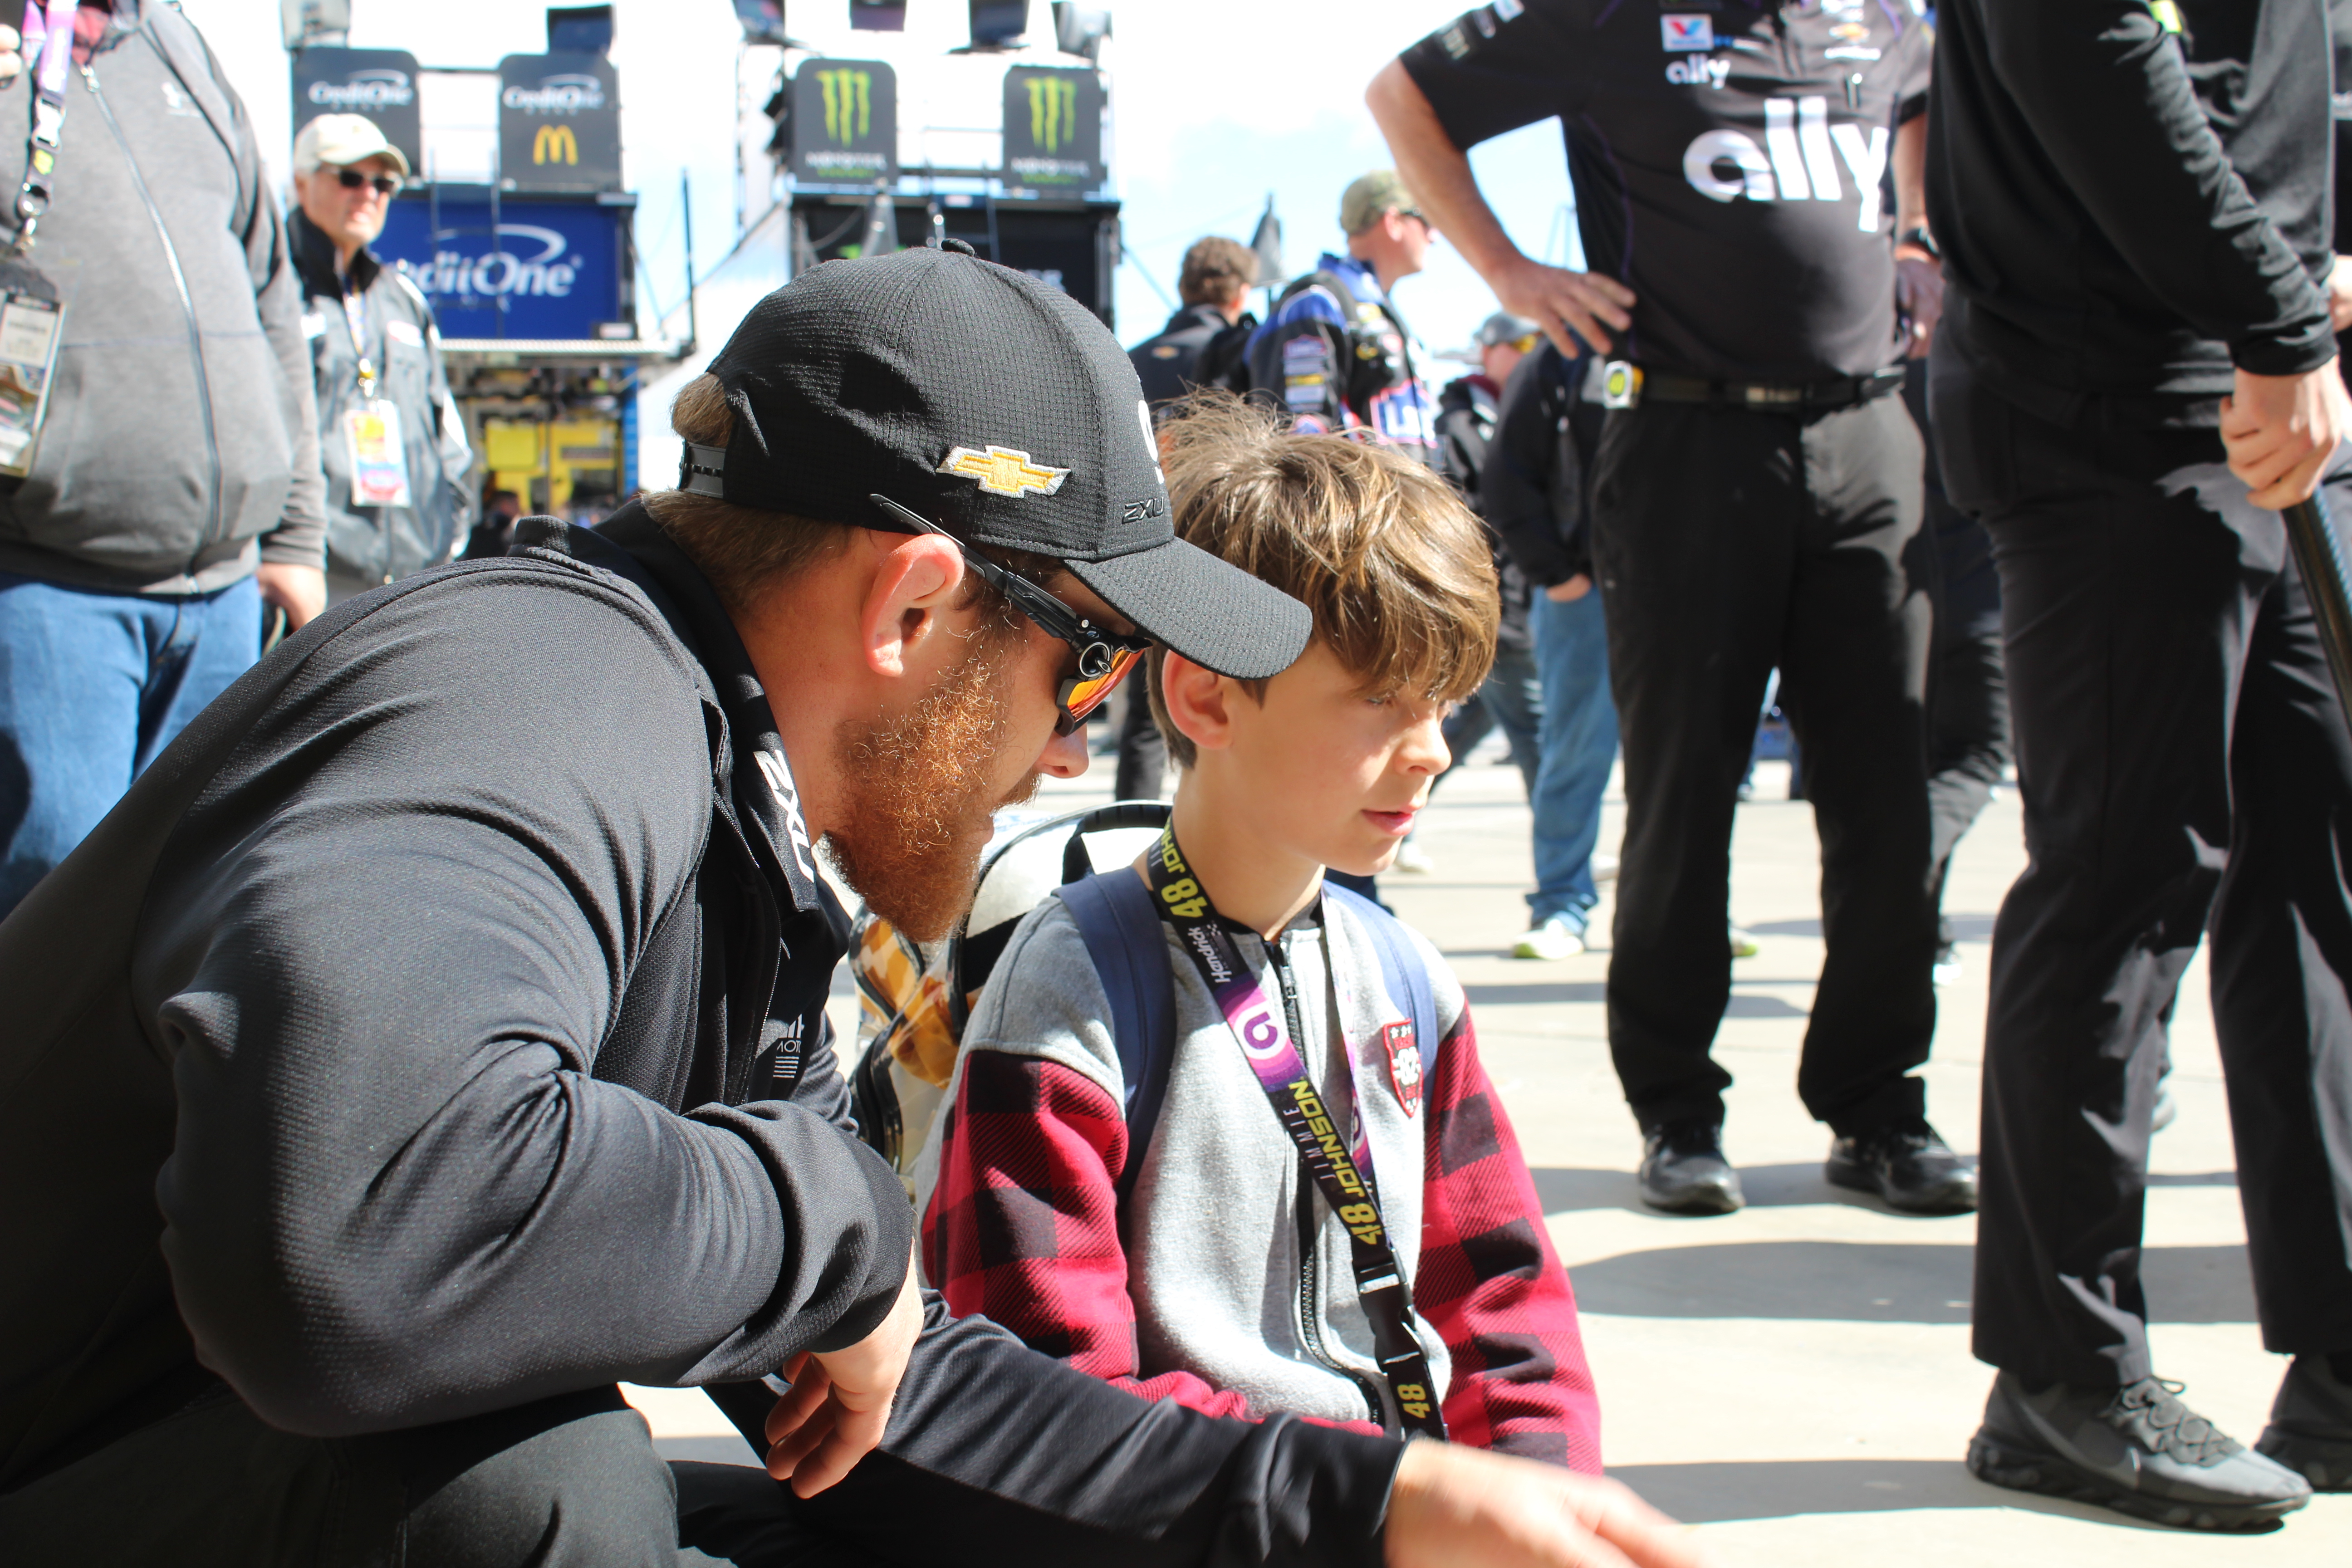 Young or old, this is why NASCAR rocks. (Photo Credit: Jose L. Acero Jr/TPF)